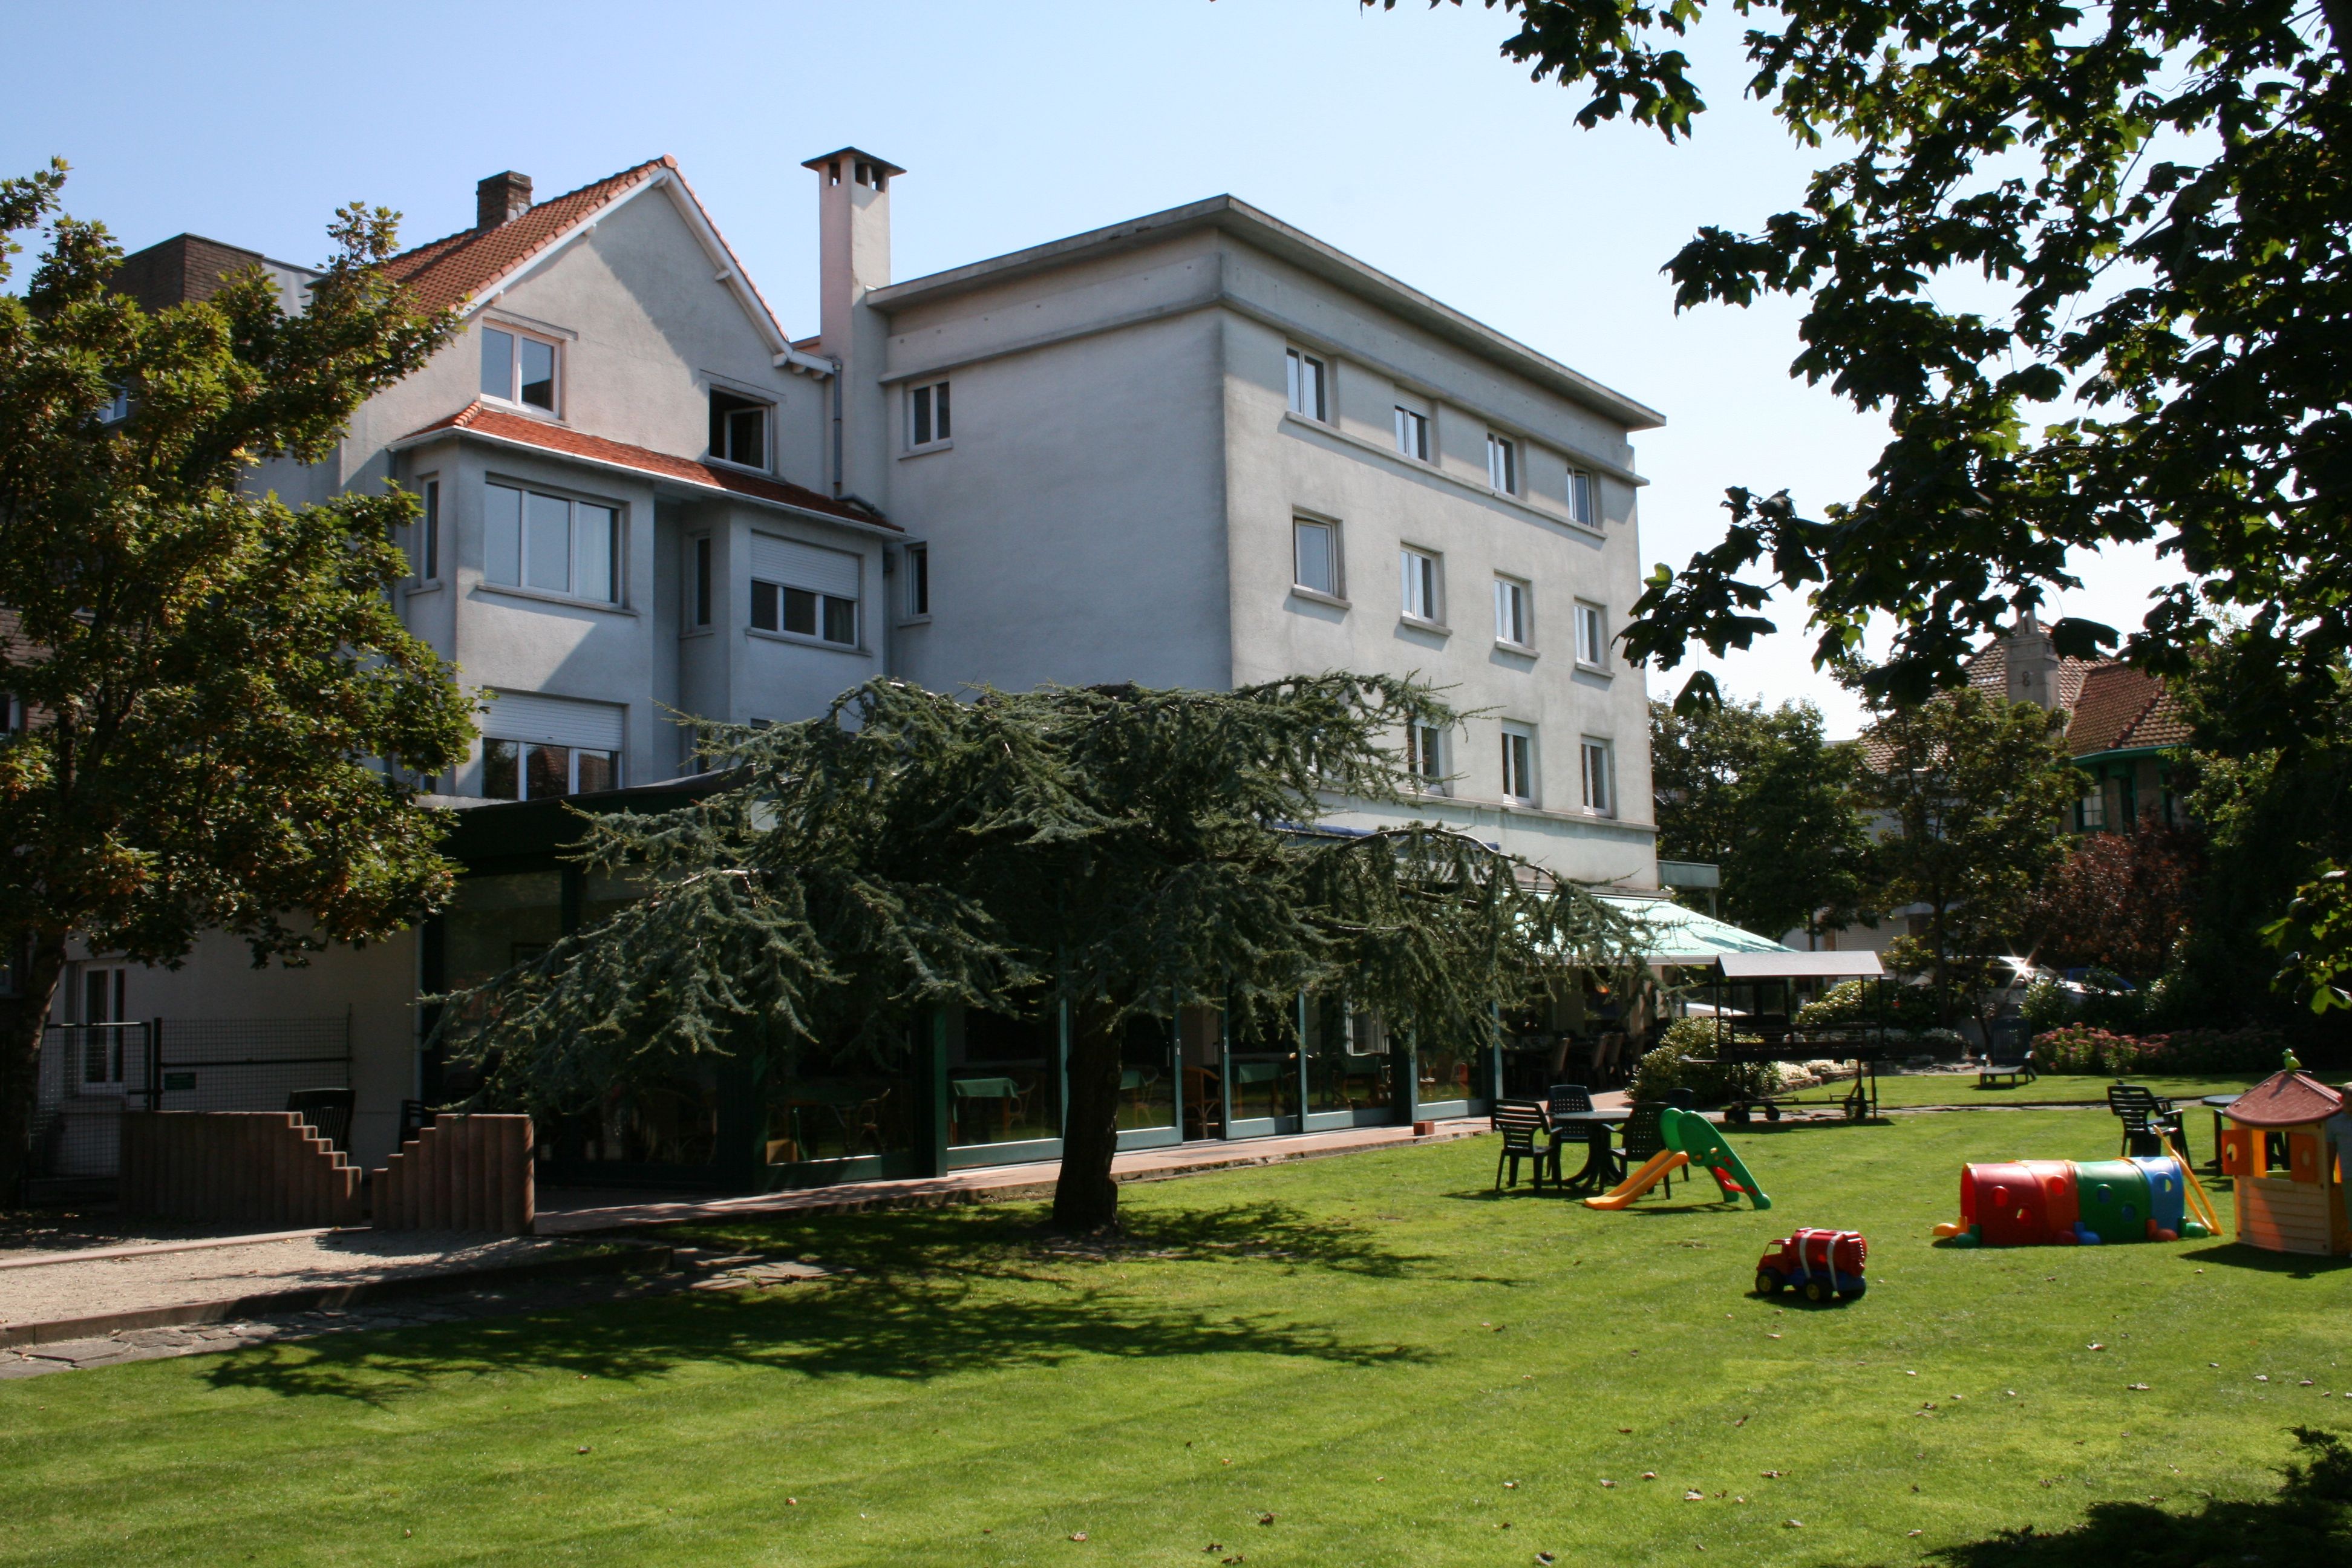 Parkhotel De Panne <br/>84.00 ew <br/> <a href='http://vakantieoplossing.nl/outpage/?id=1dc976c19d591eb48330d133f879e195' target='_blank'>View Details</a>